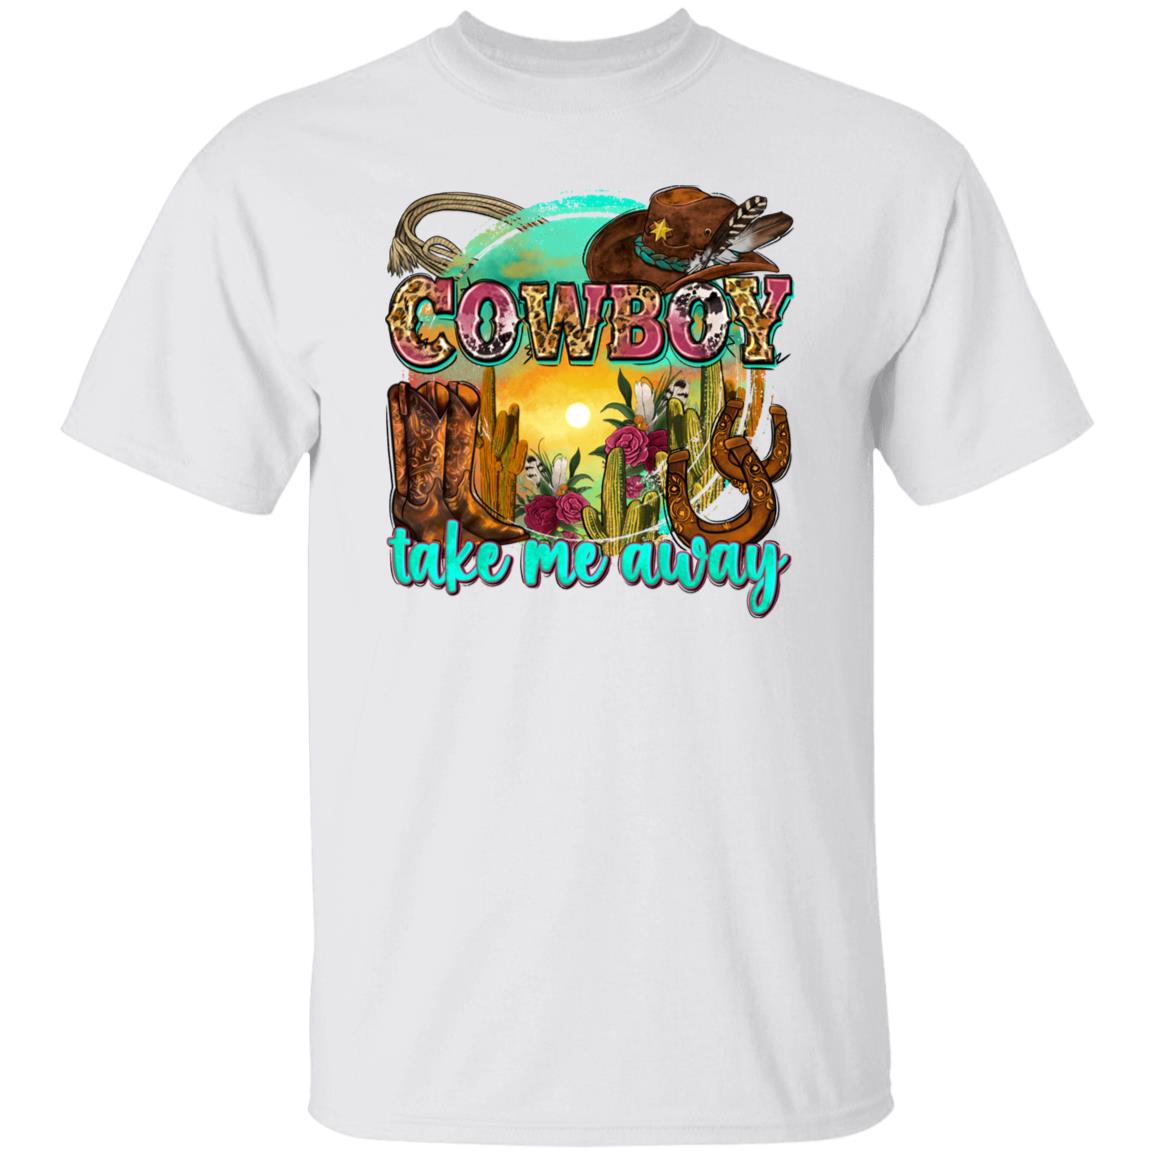 Cowboy take me away T-Shirt Texas Western boots cactus hat Unisex tee White Sand Sport Grey-Family-Gift-Planet